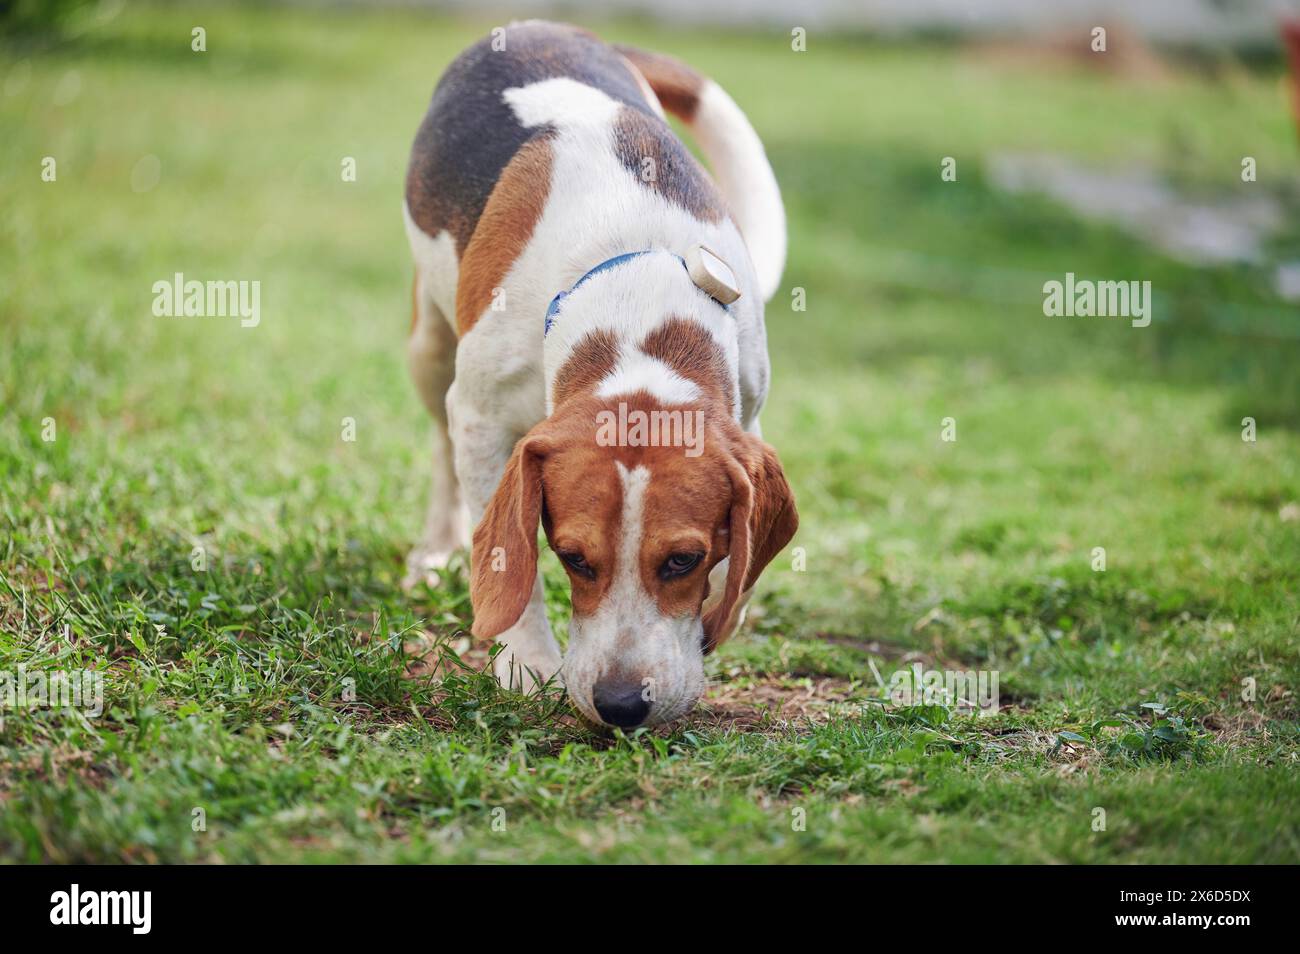 Beagle dog smell ground on green blurred grass background Stock Photo